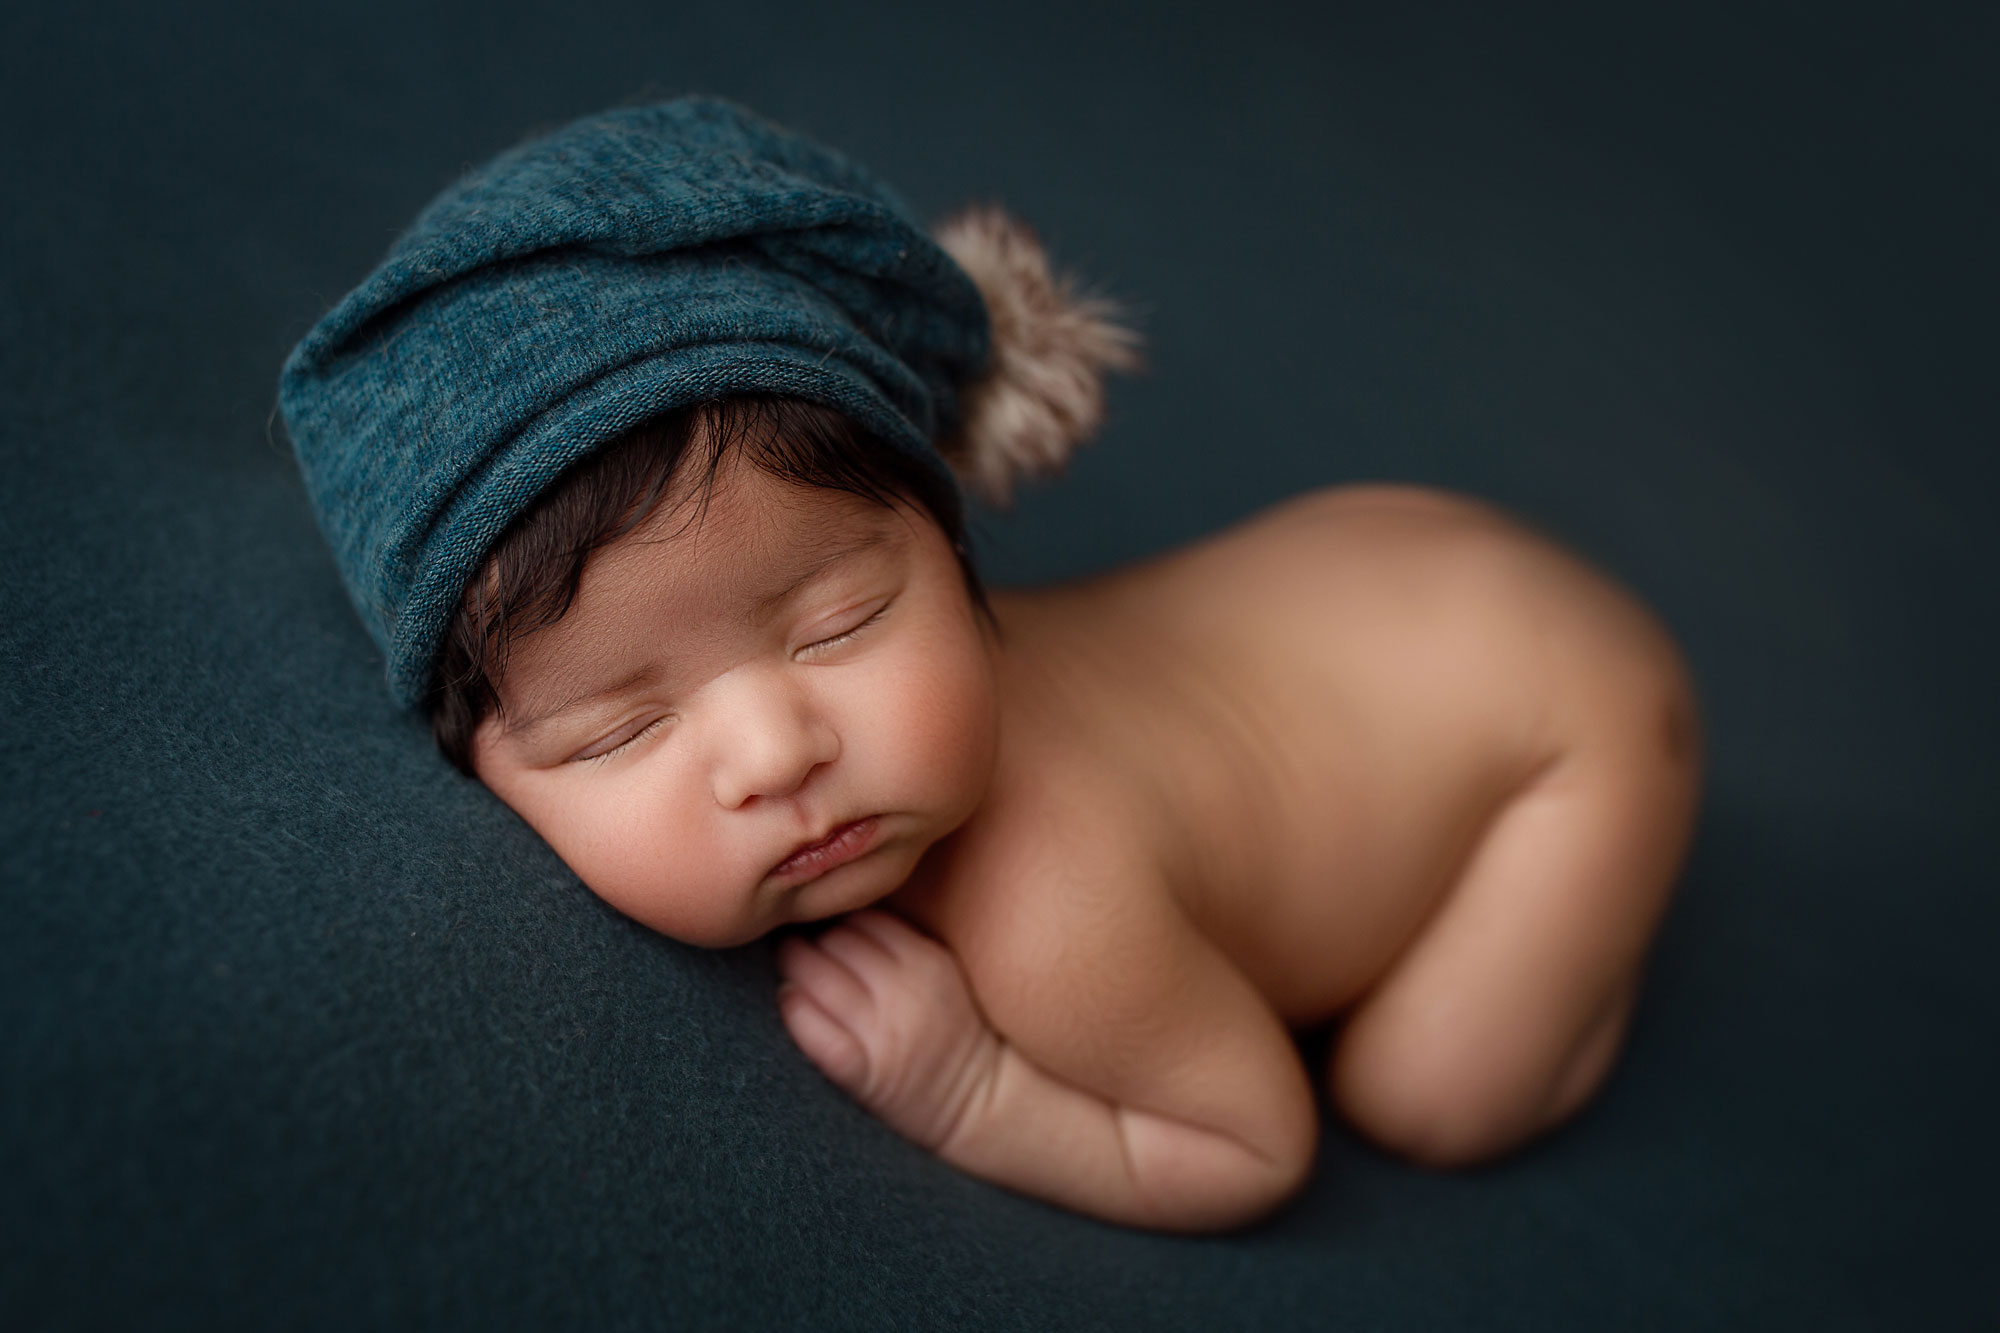 nj baby pictures, sleeping baby boy with blue cap against dark blue background